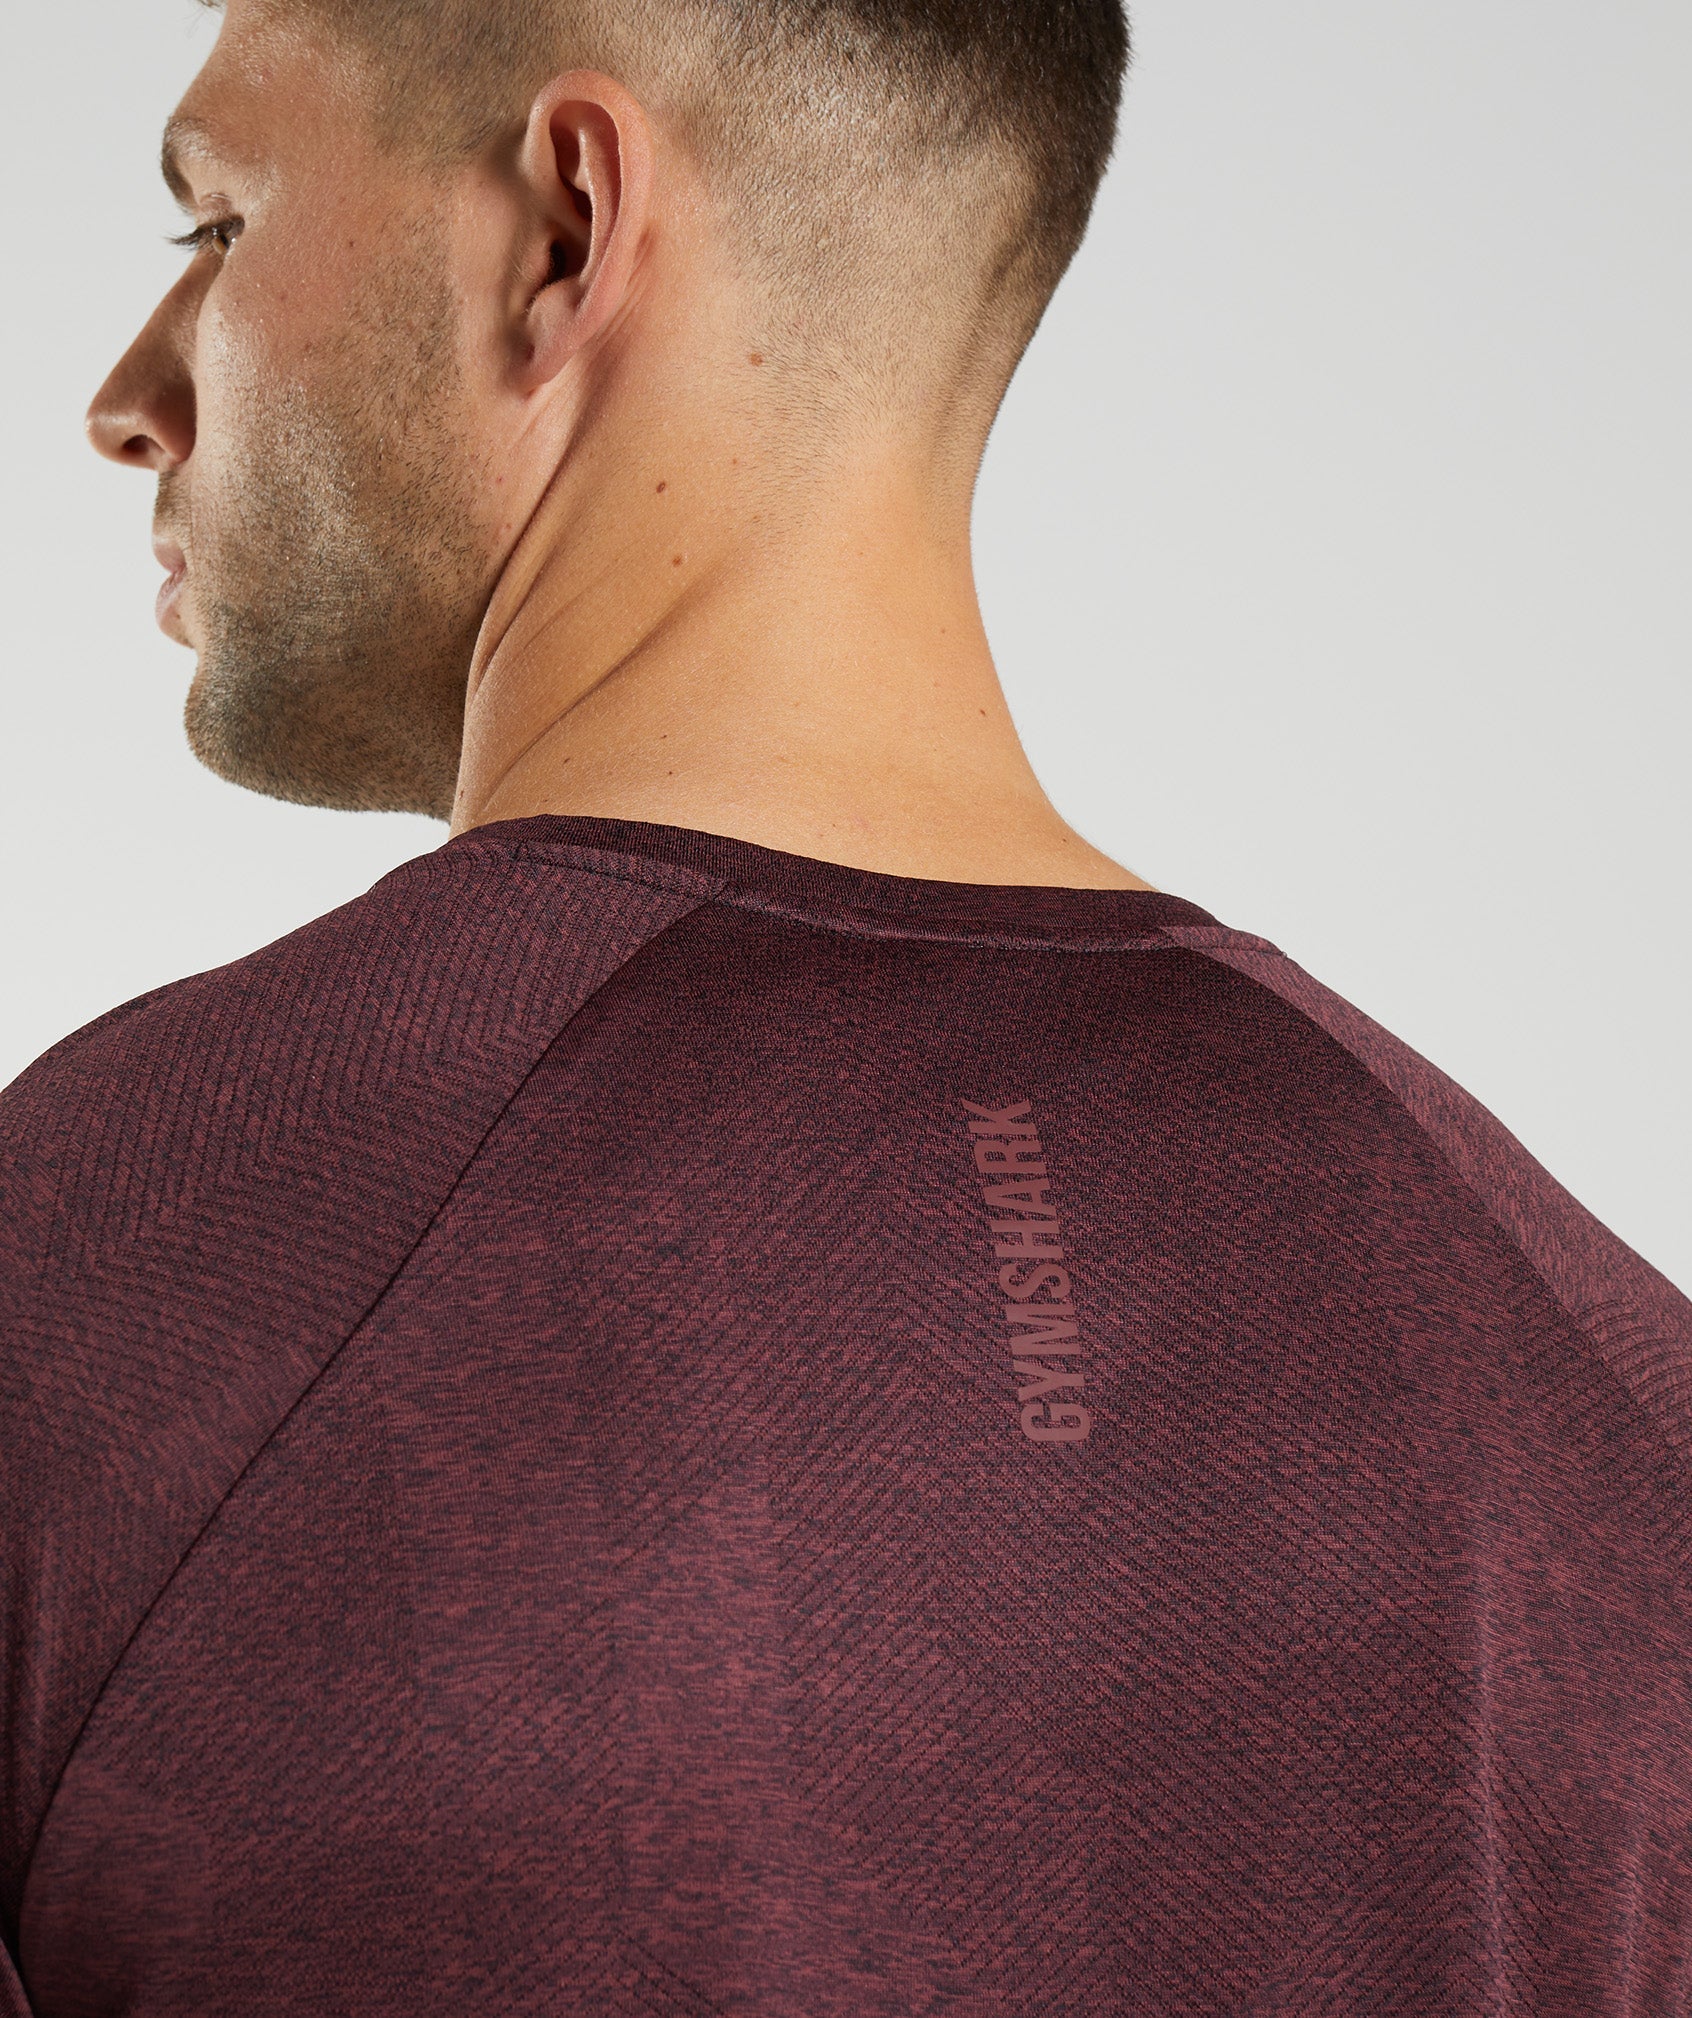 Apex Long Sleeve T-Shirt in Cherry Brown